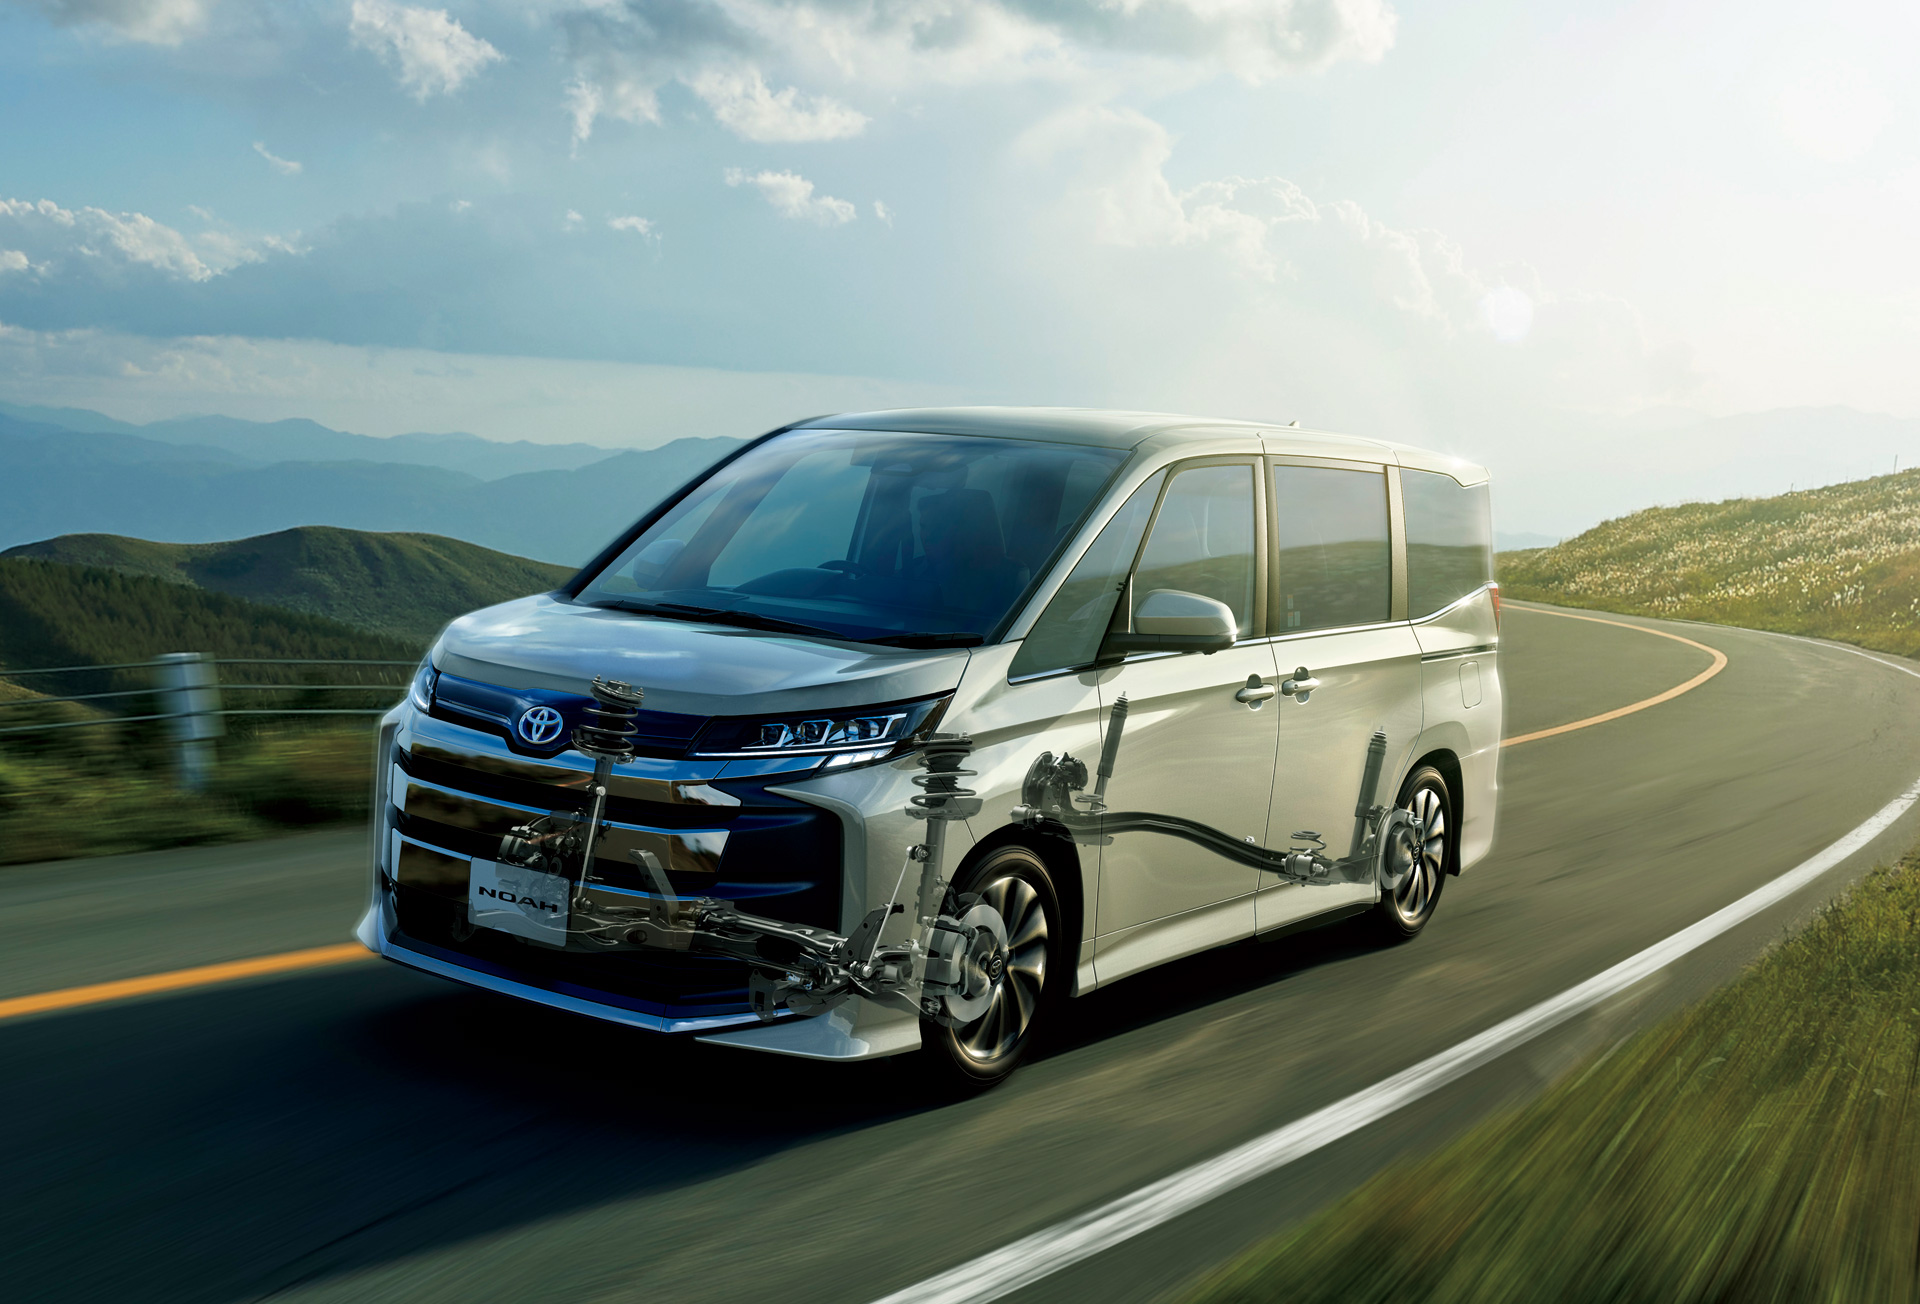 Toyota Launches New Noah and Voxy Minivans in JapanMinivans with more comfort, convenience, and peace of mind to bring joy to all - Image 7